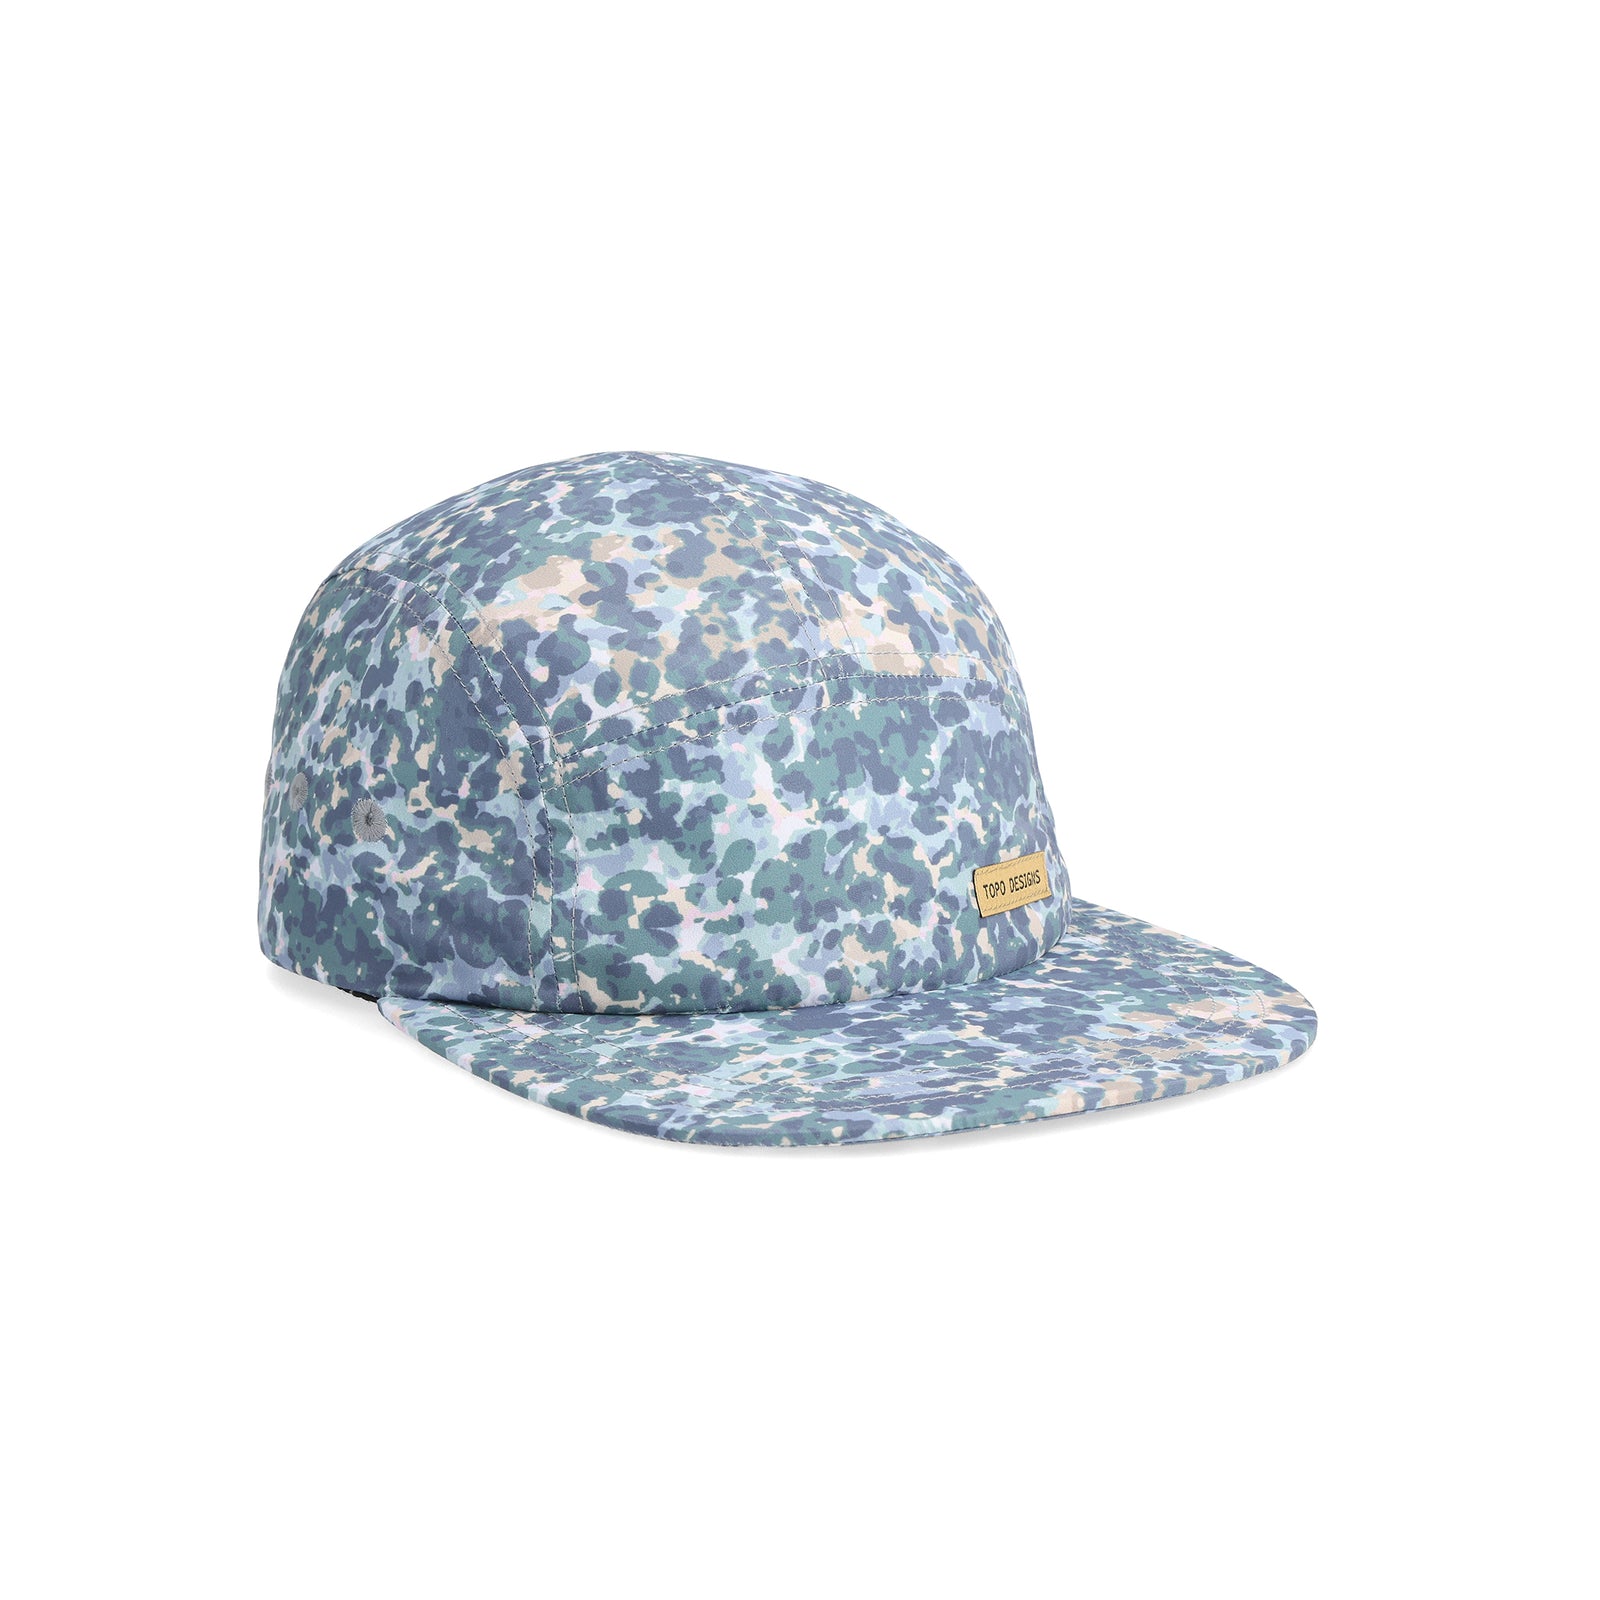 Front View of Topo Designs Nylon Camp Hat in "Slate Meteor"